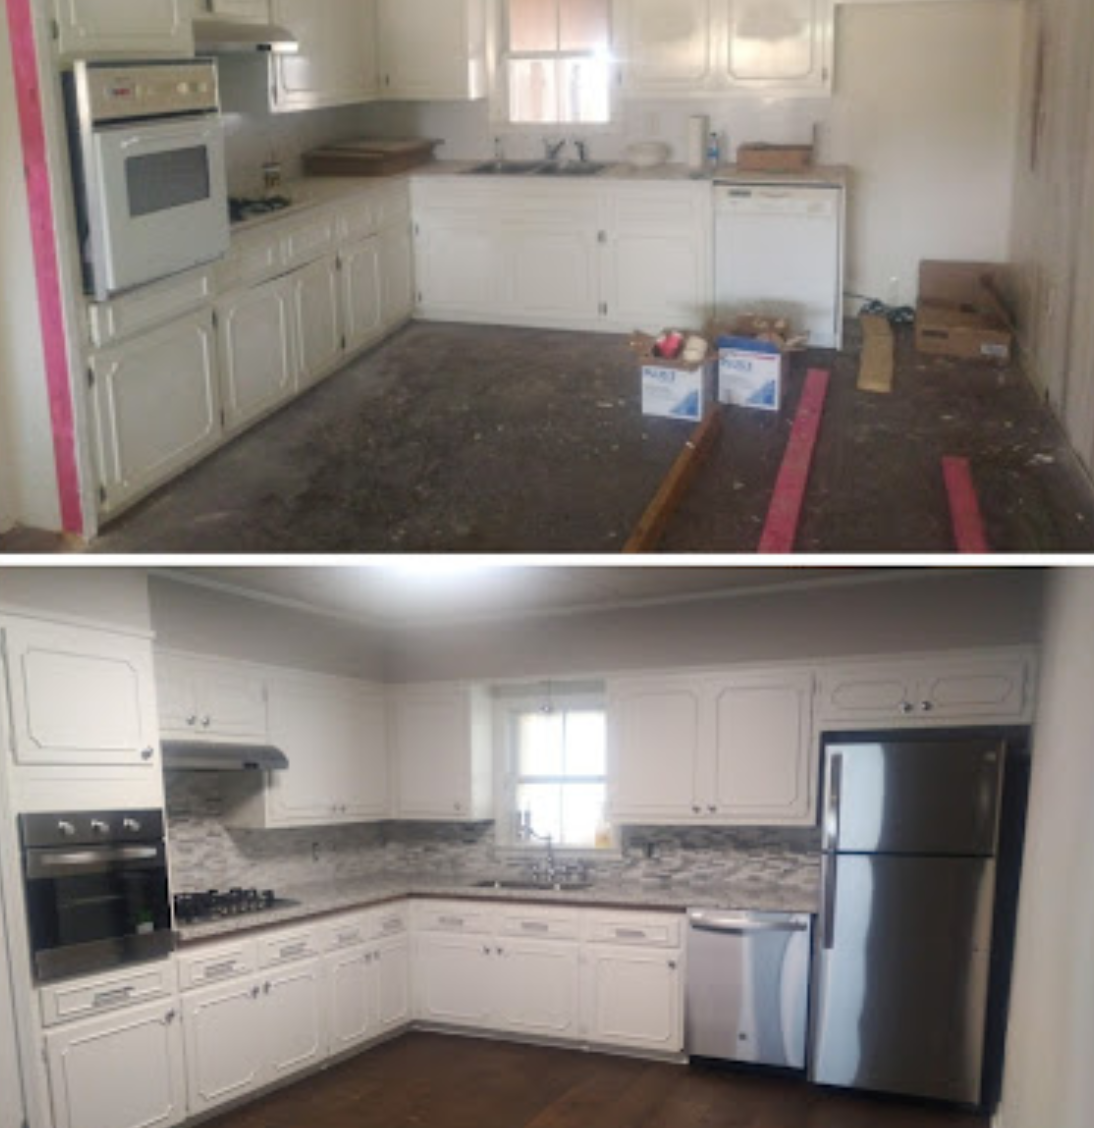 Kitchen and Cabinet Refinishing for All South Painting in Erath, LA